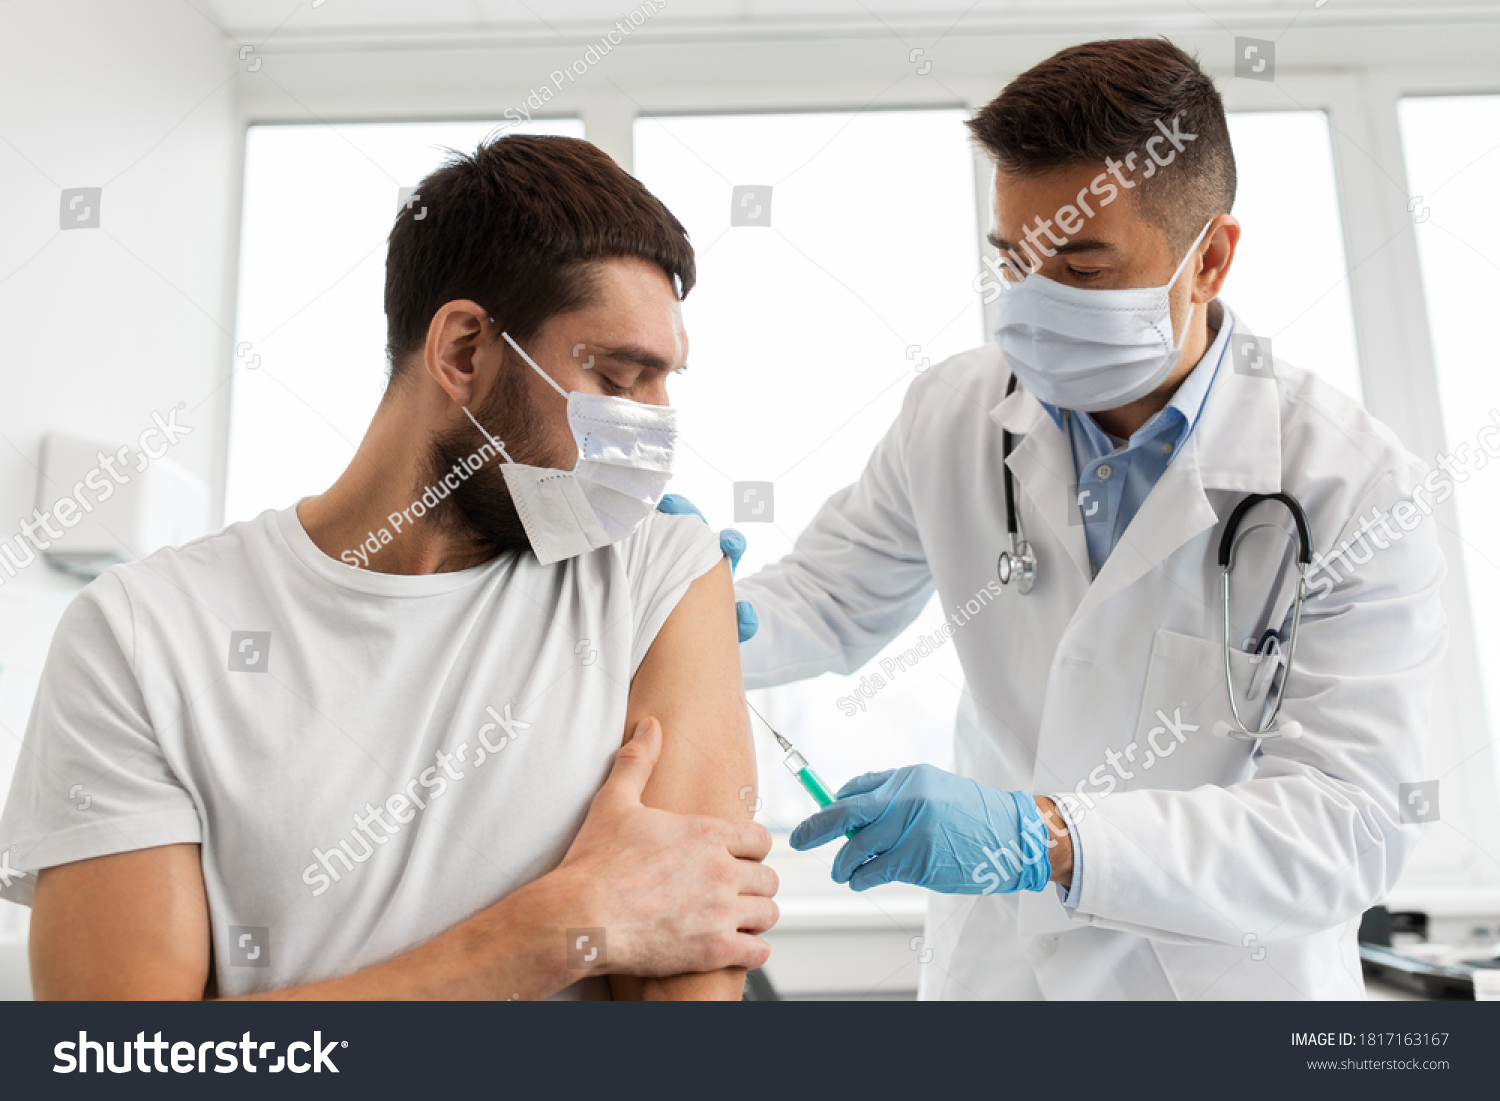 medicine, vaccination and healthcare concept - doctor wearing face protective medical mask for protection from virus disease with syringe doing injection of vaccine to male patient #1817163167